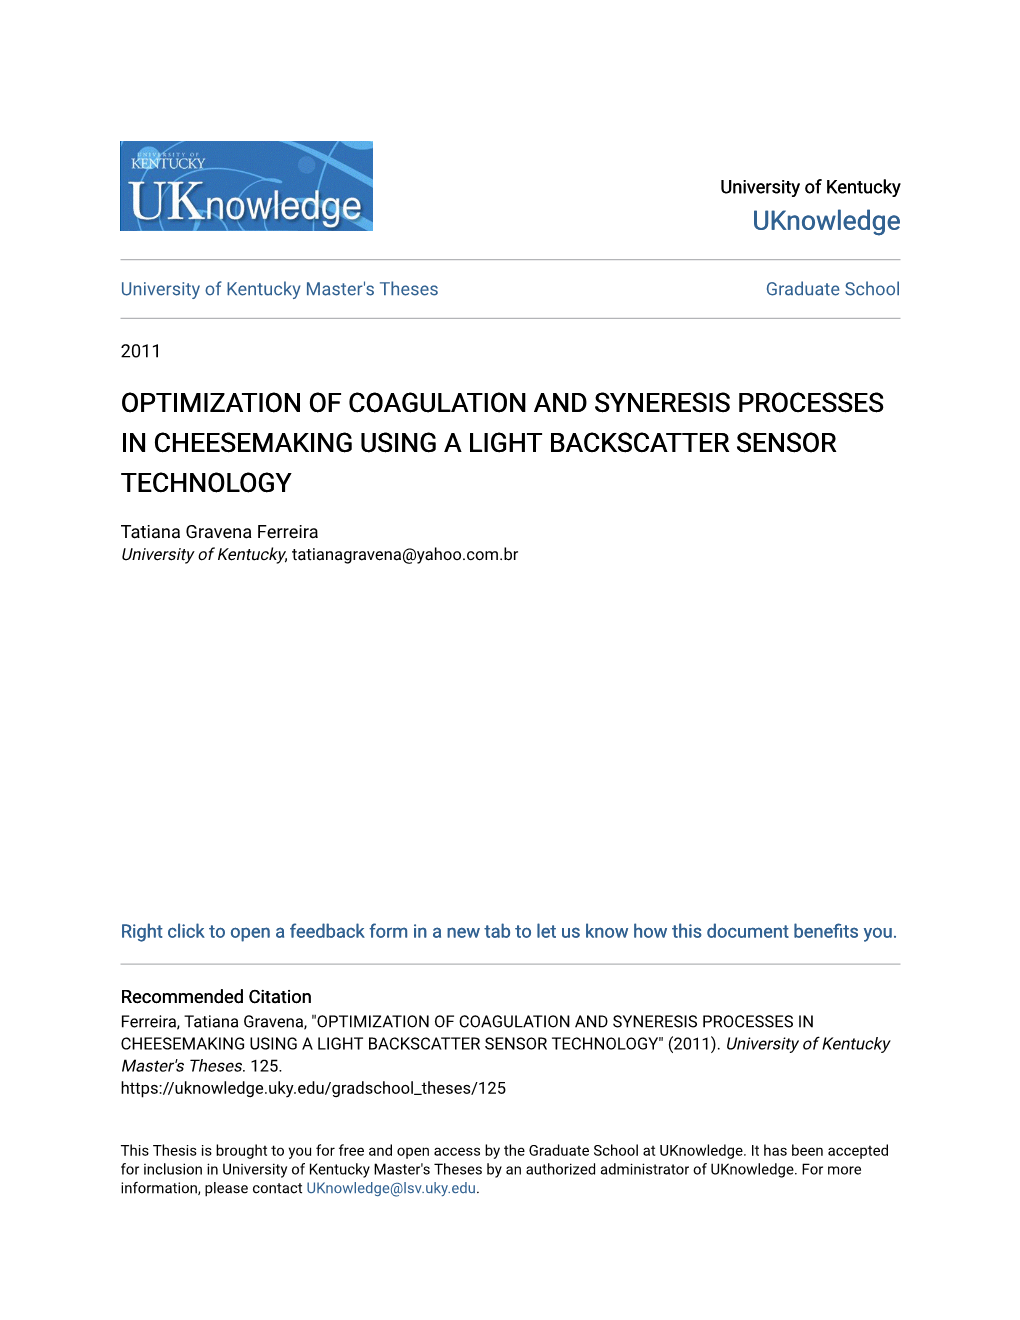 Optimization of Coagulation and Syneresis Processes in Cheesemaking Using a Light Backscatter Sensor Technology